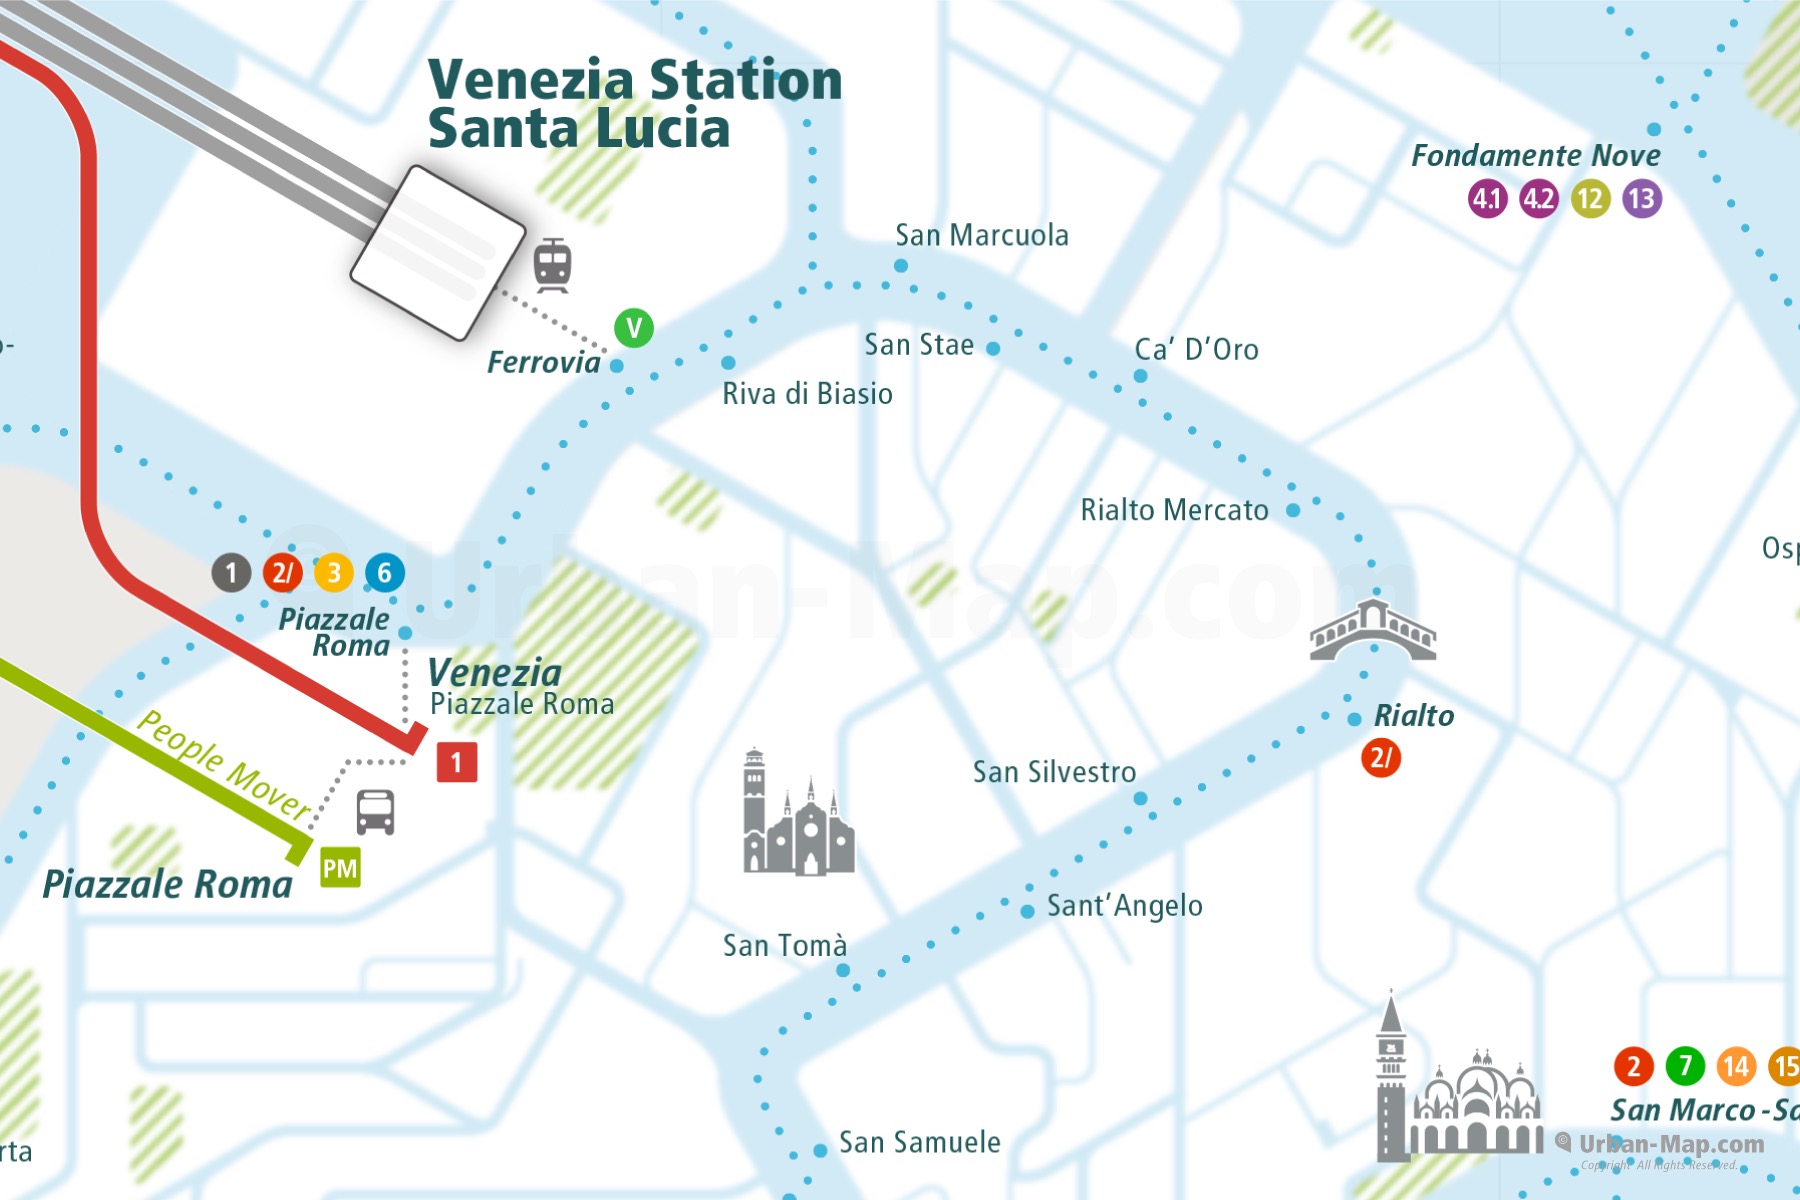 Venice City Rail Map shows the train and public transportation routes of Vaporetto, Waterbus and Ferry and Station Santa Lucia and Rialto Bridge - Close-Up